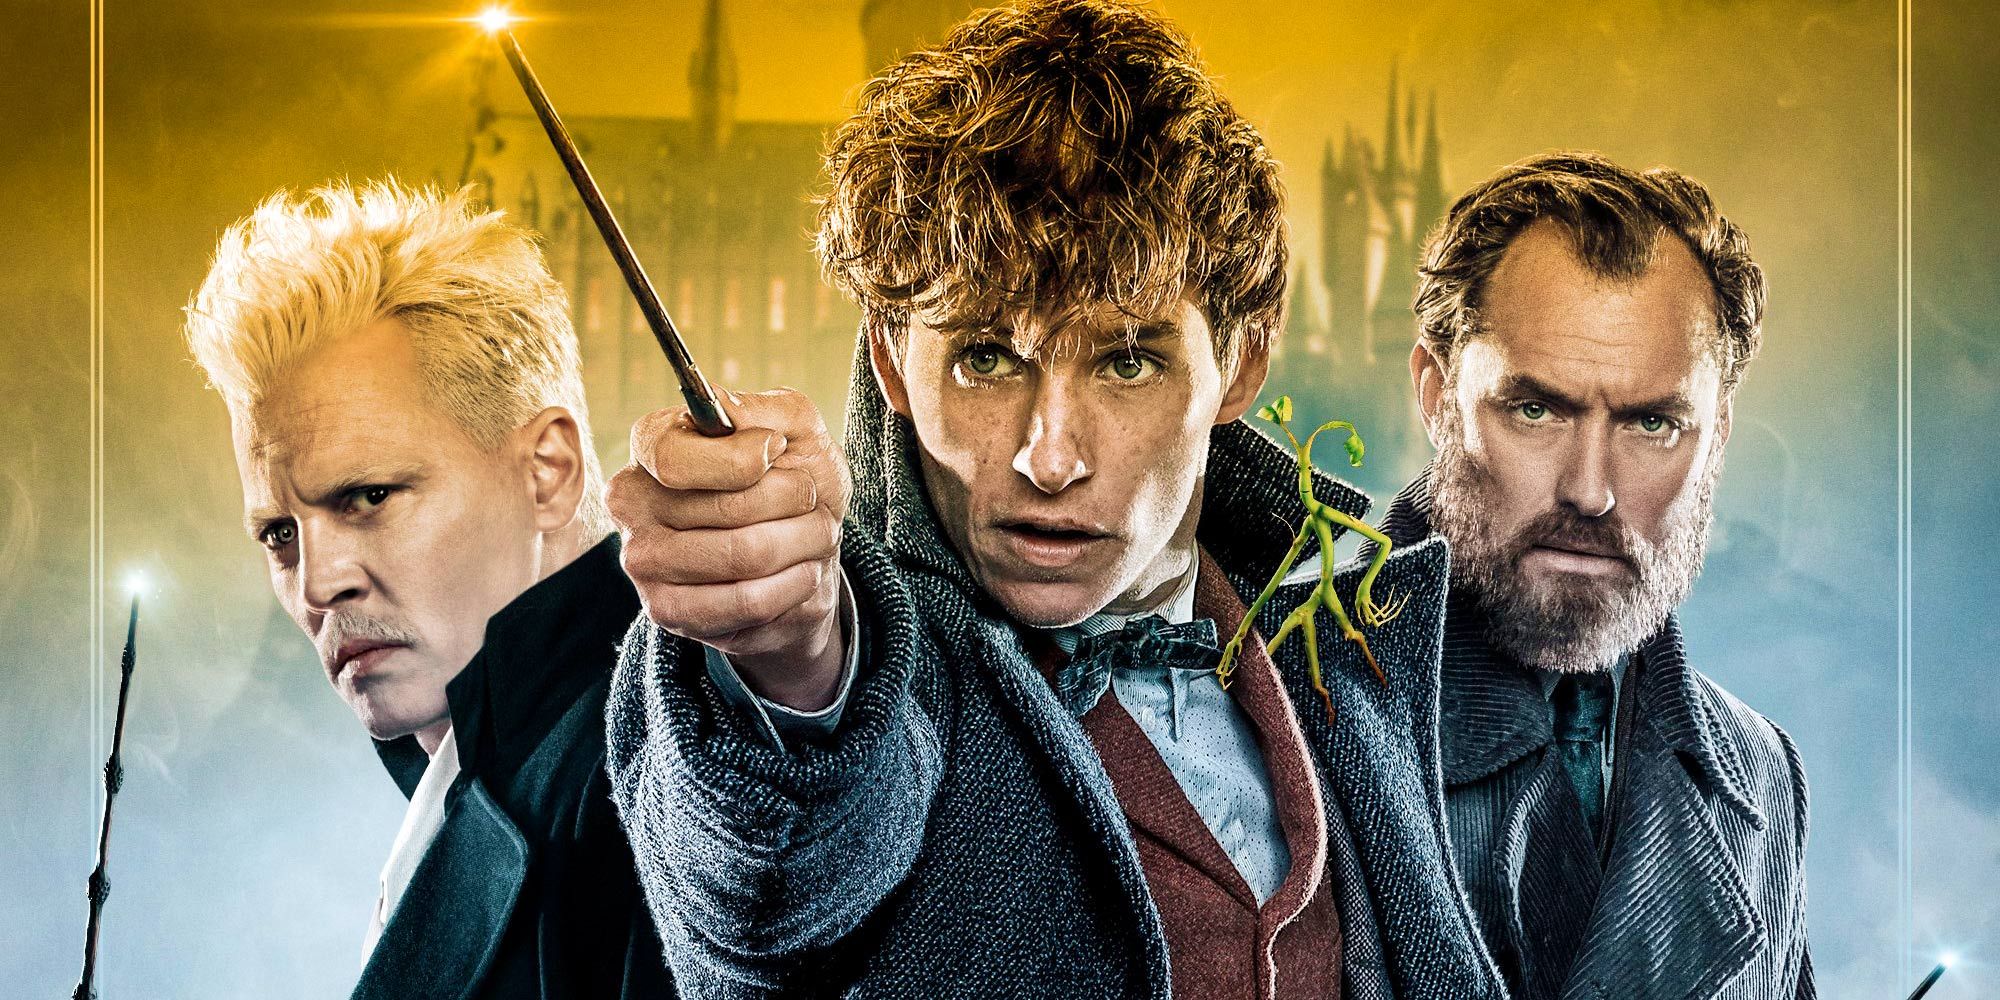 Harry Potter Needs A New Sequel With The Original Stars More Than SpinOffs